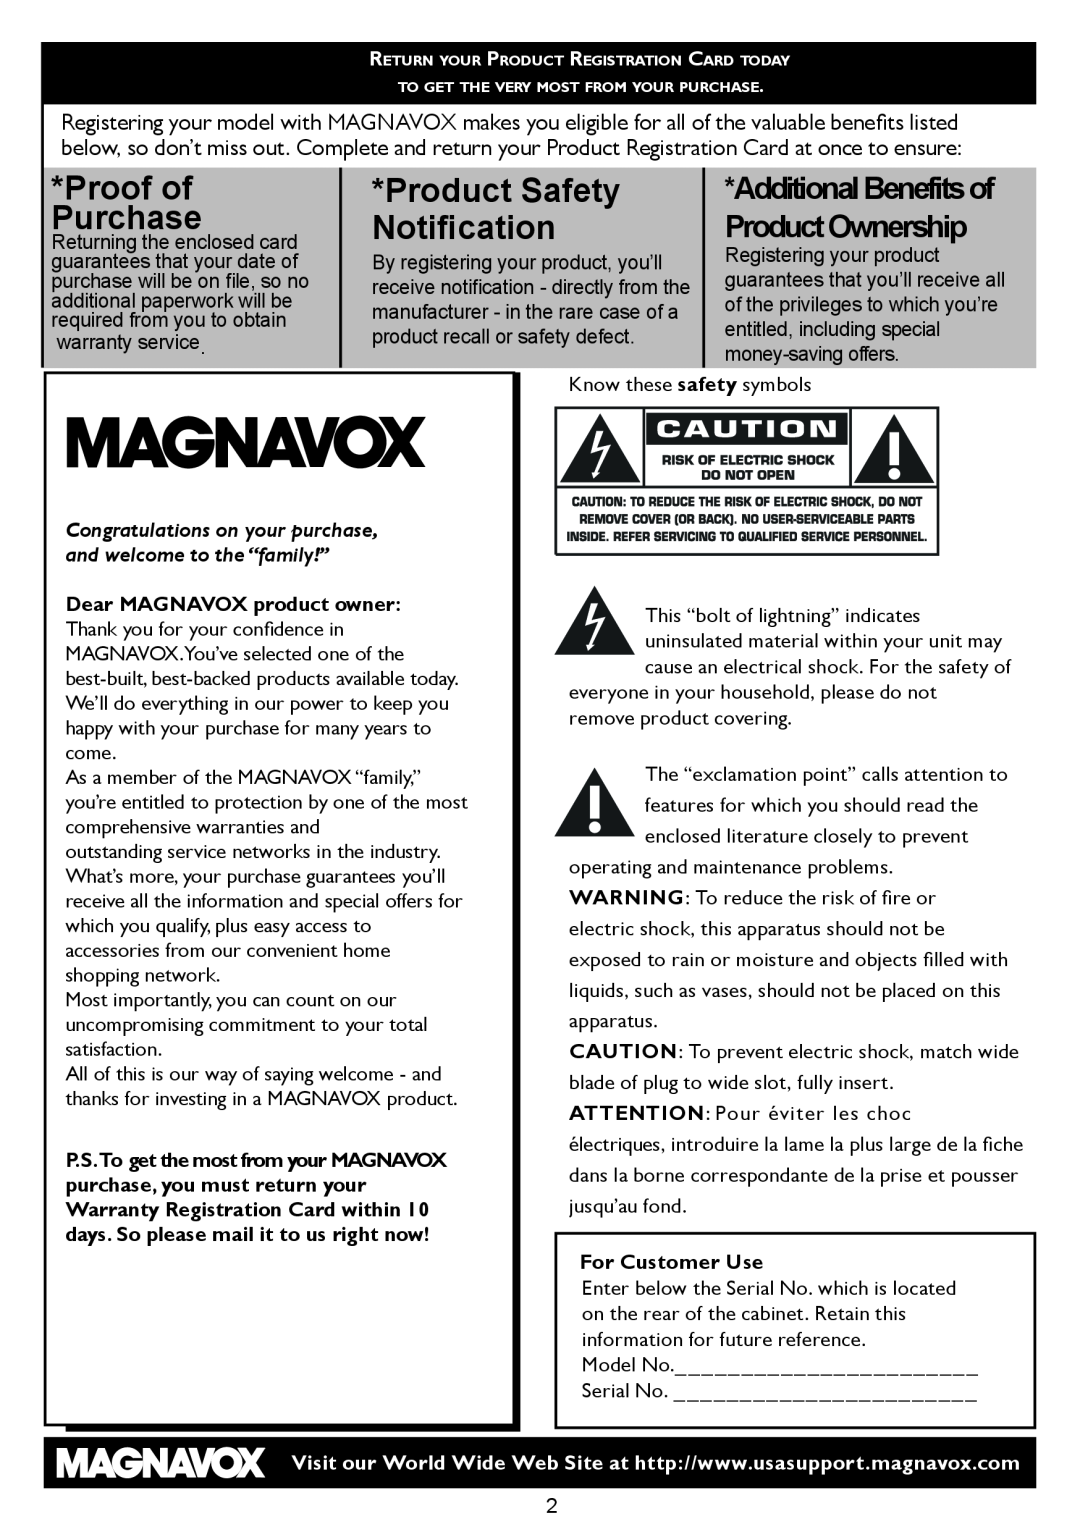 Magnavox 15MF/20MF owner manual AdditionalBenefitsof ProductOwnership, Proof of Purchase, Product Safety Notiﬁcation 